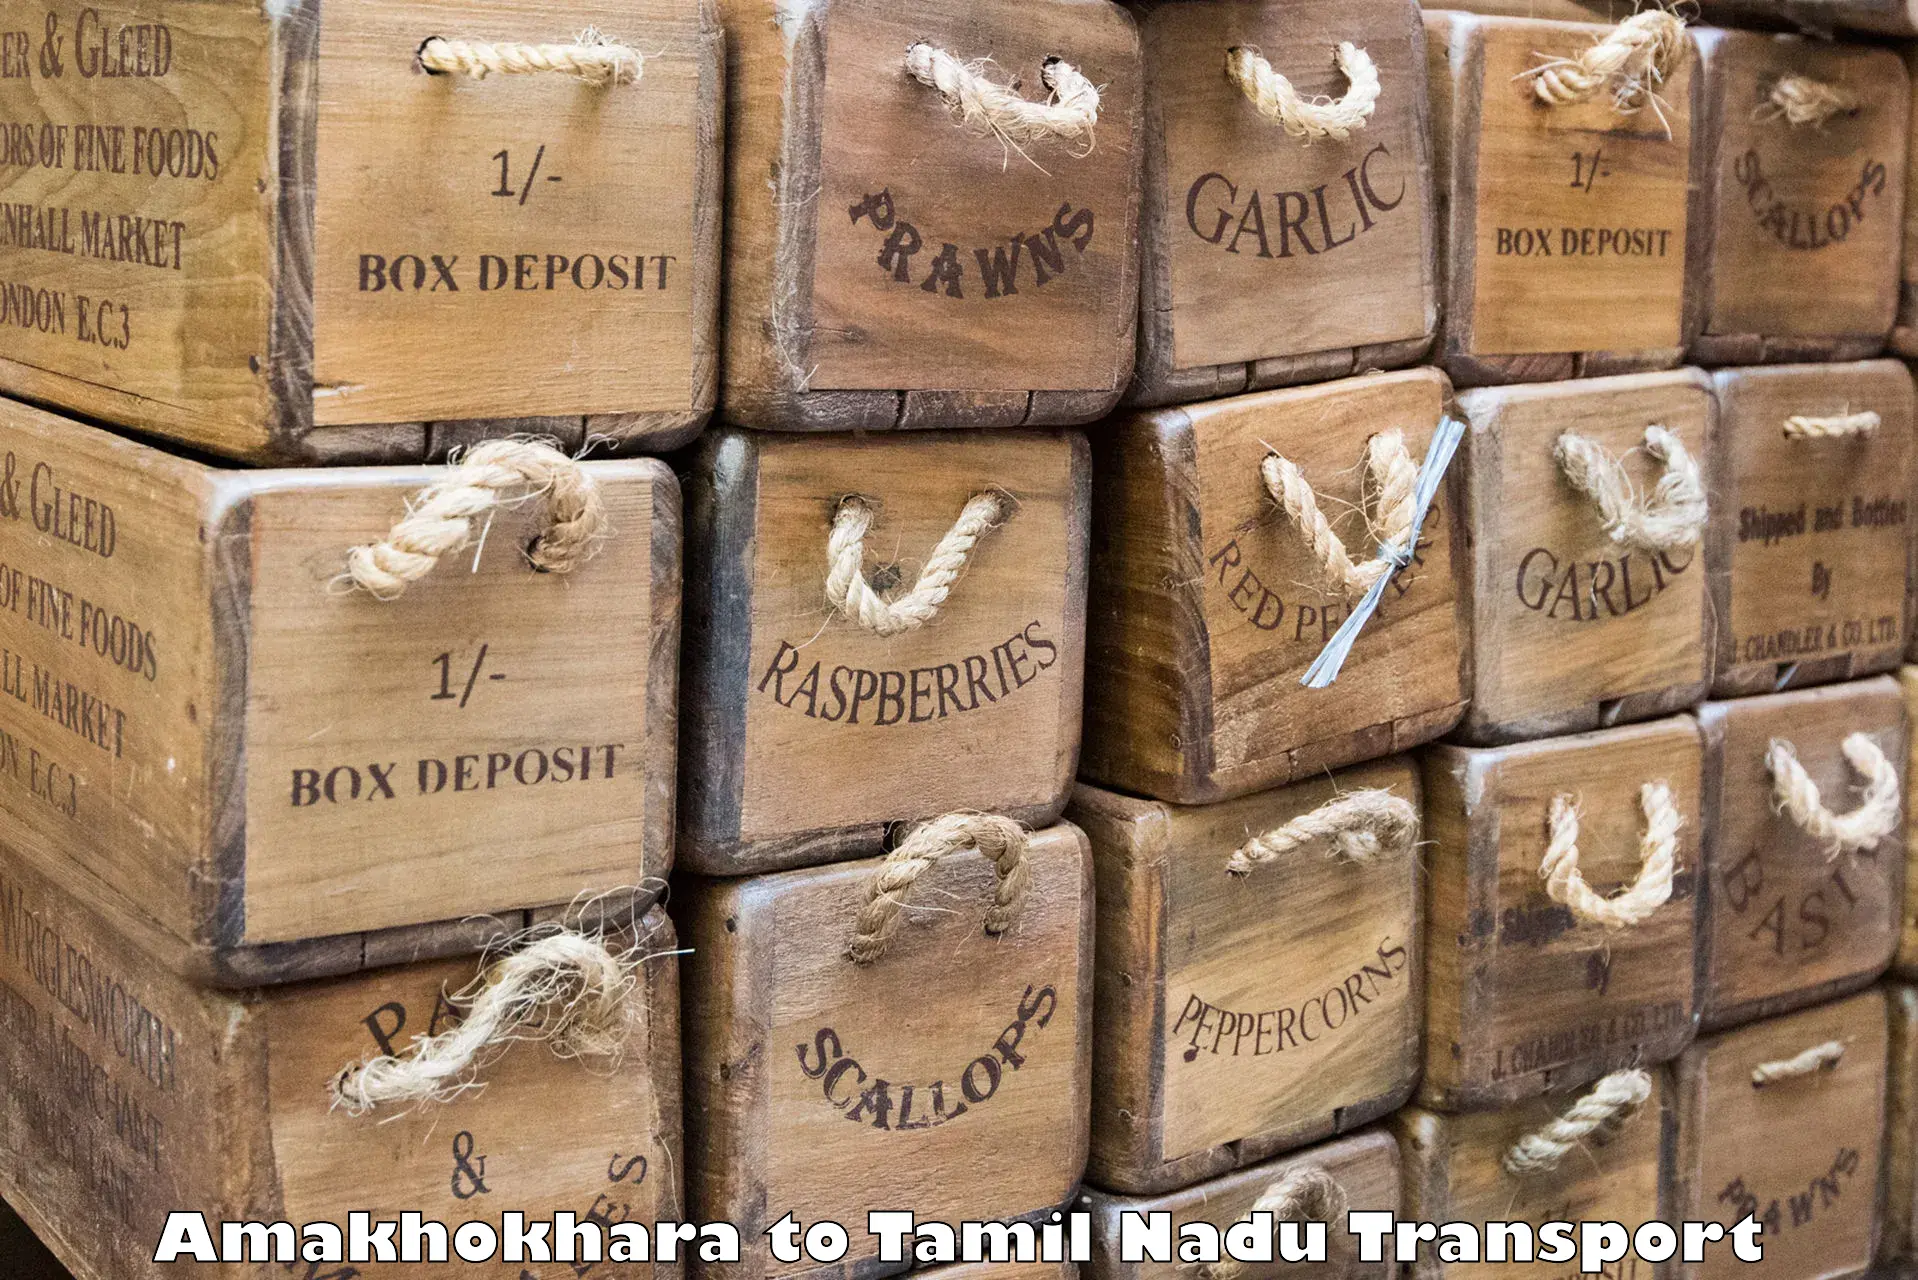 Transport bike from one state to another Amakhokhara to Chennai